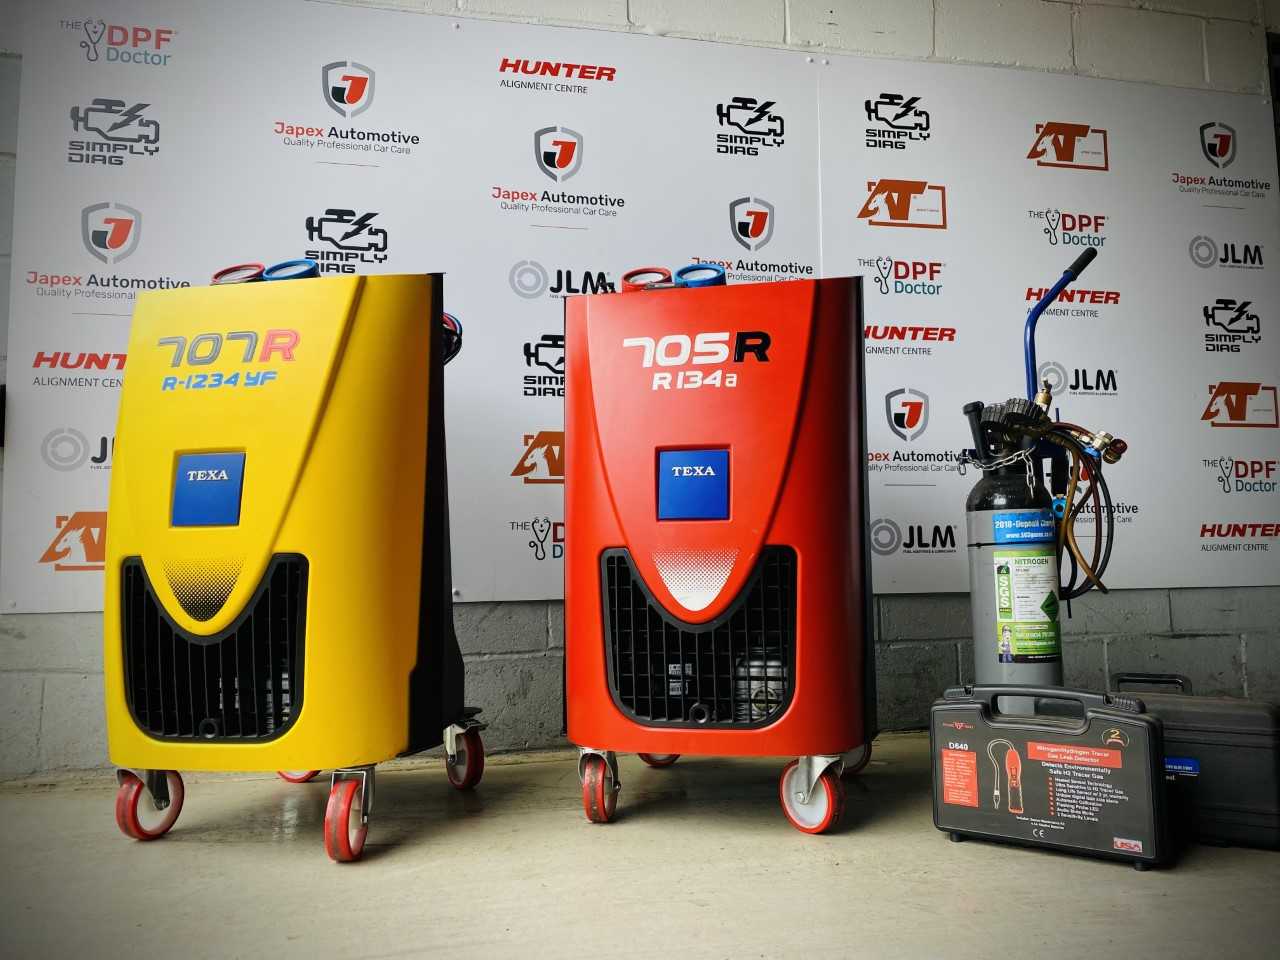 Car air-con machines. One yellow, one red, and one in grey, orange, and blue.